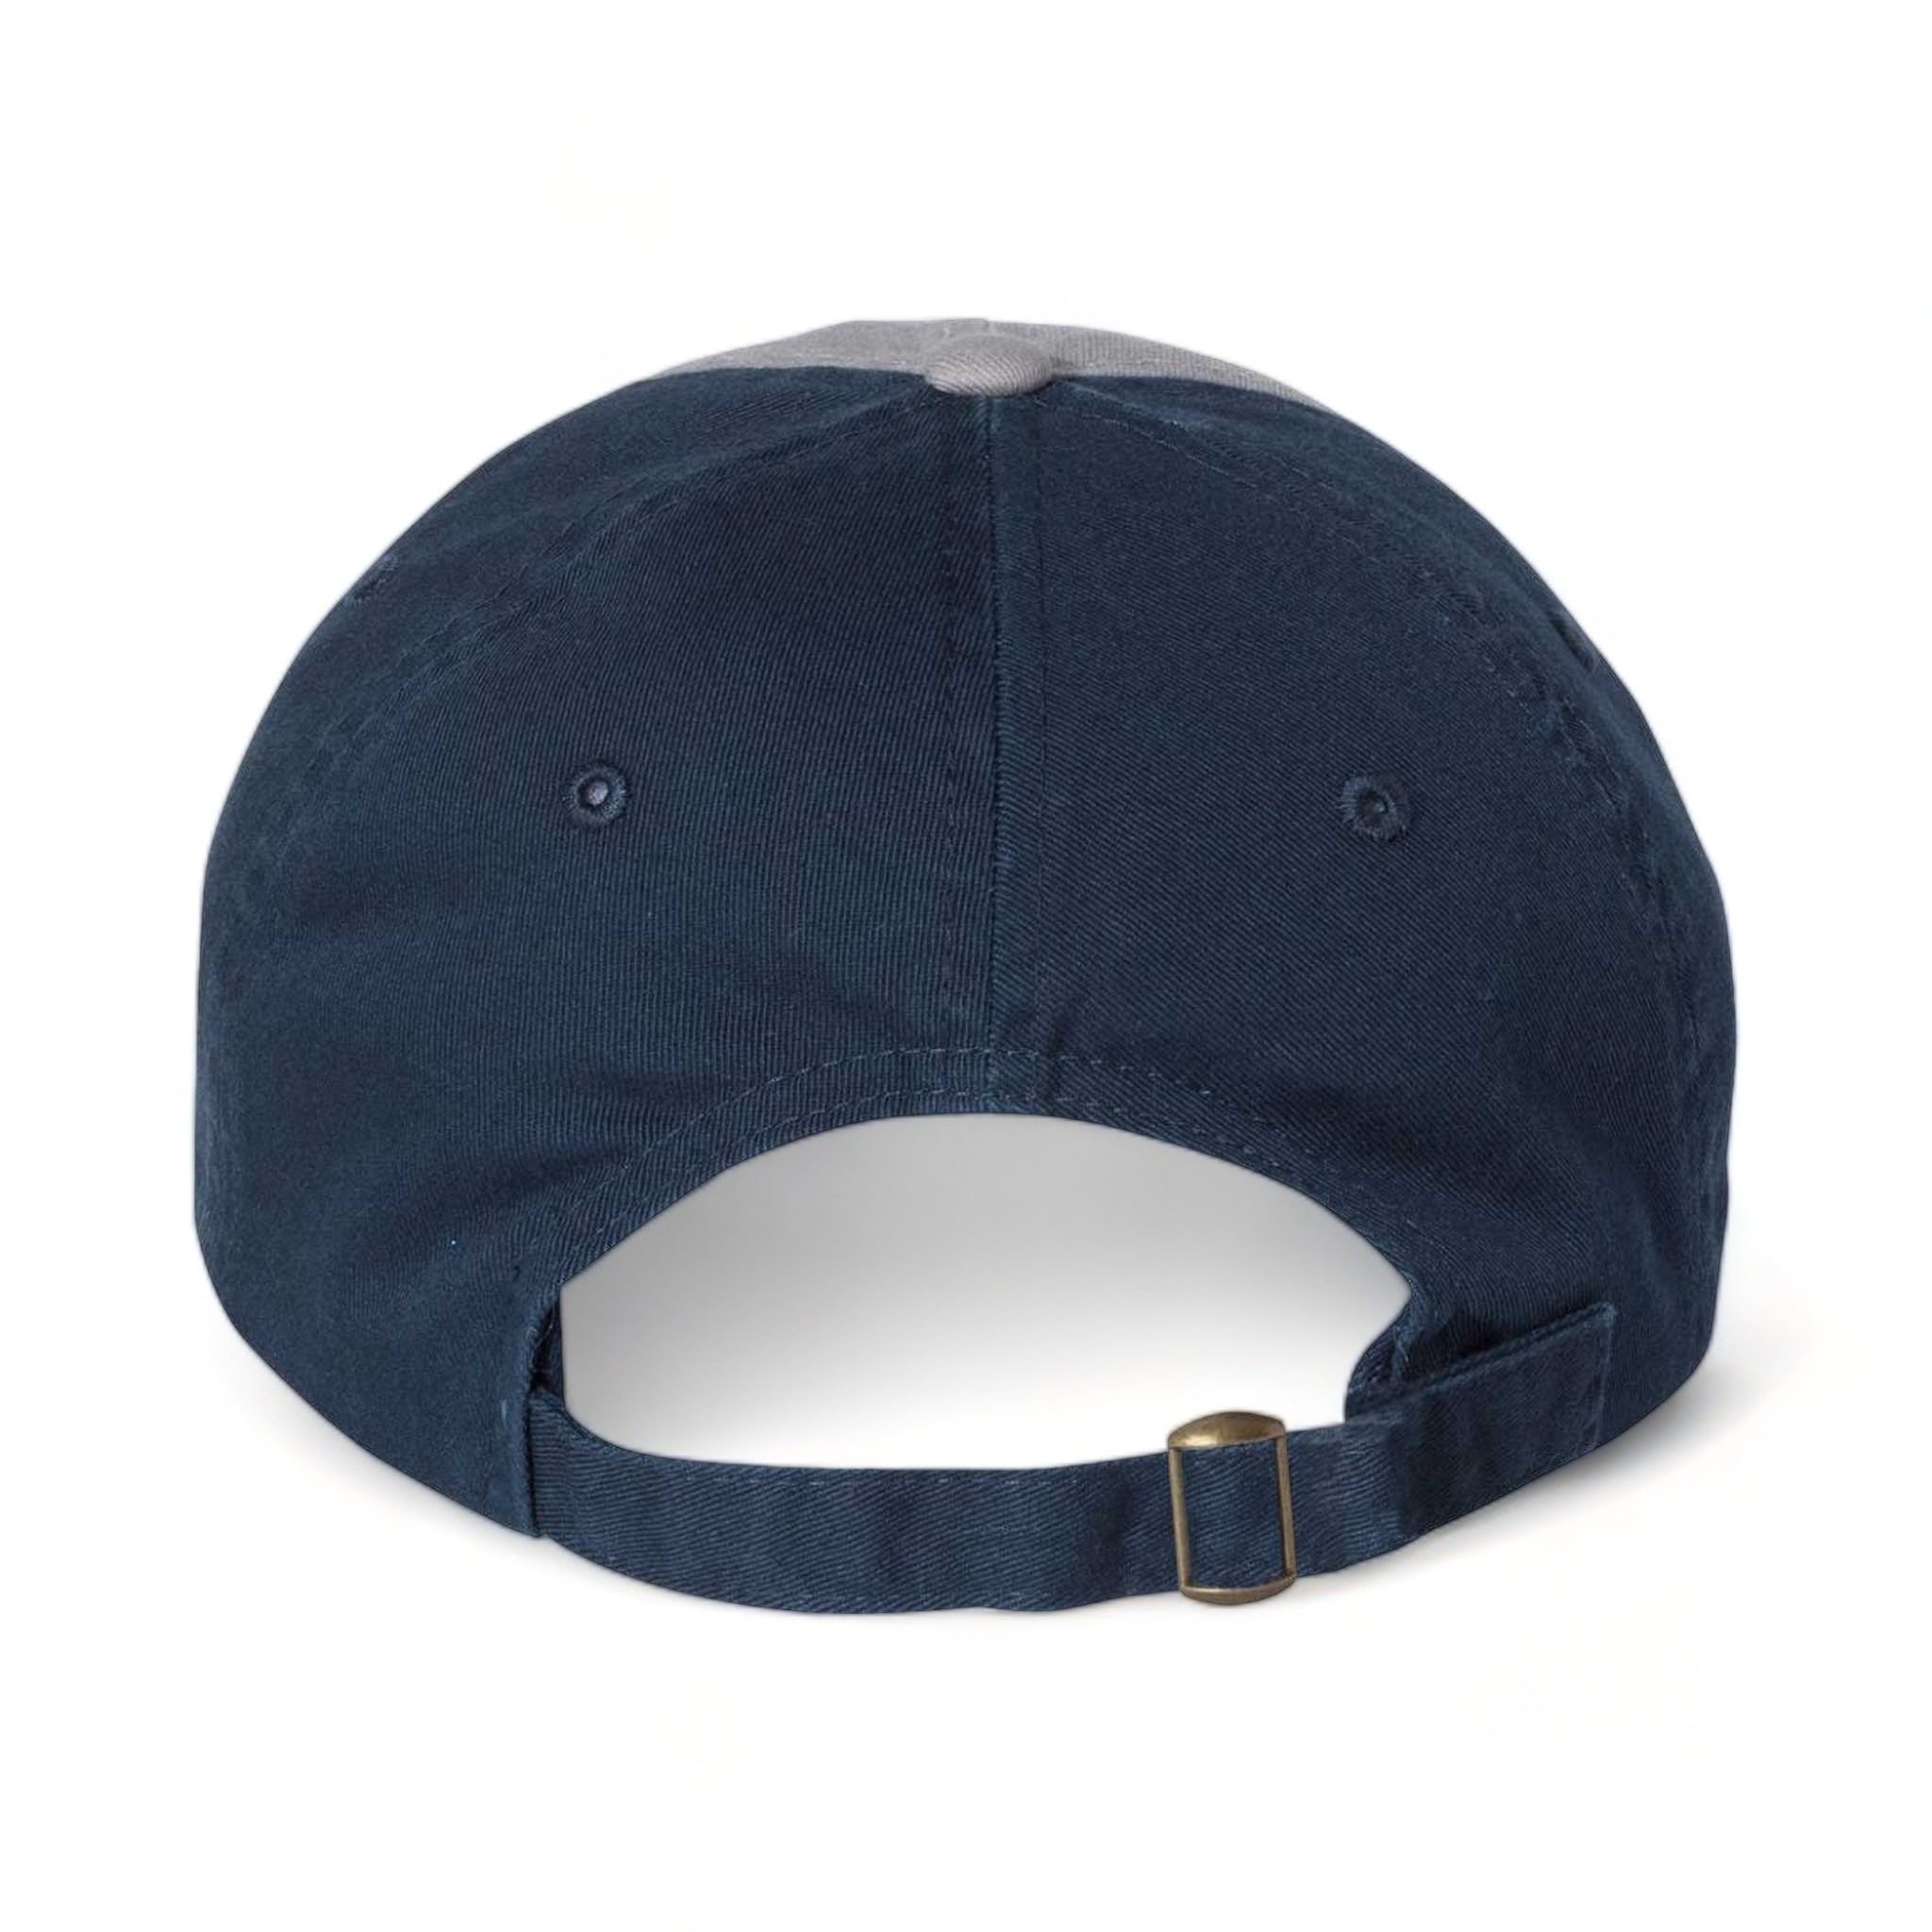 Back view of Valucap VC300A custom hat in grey and navy